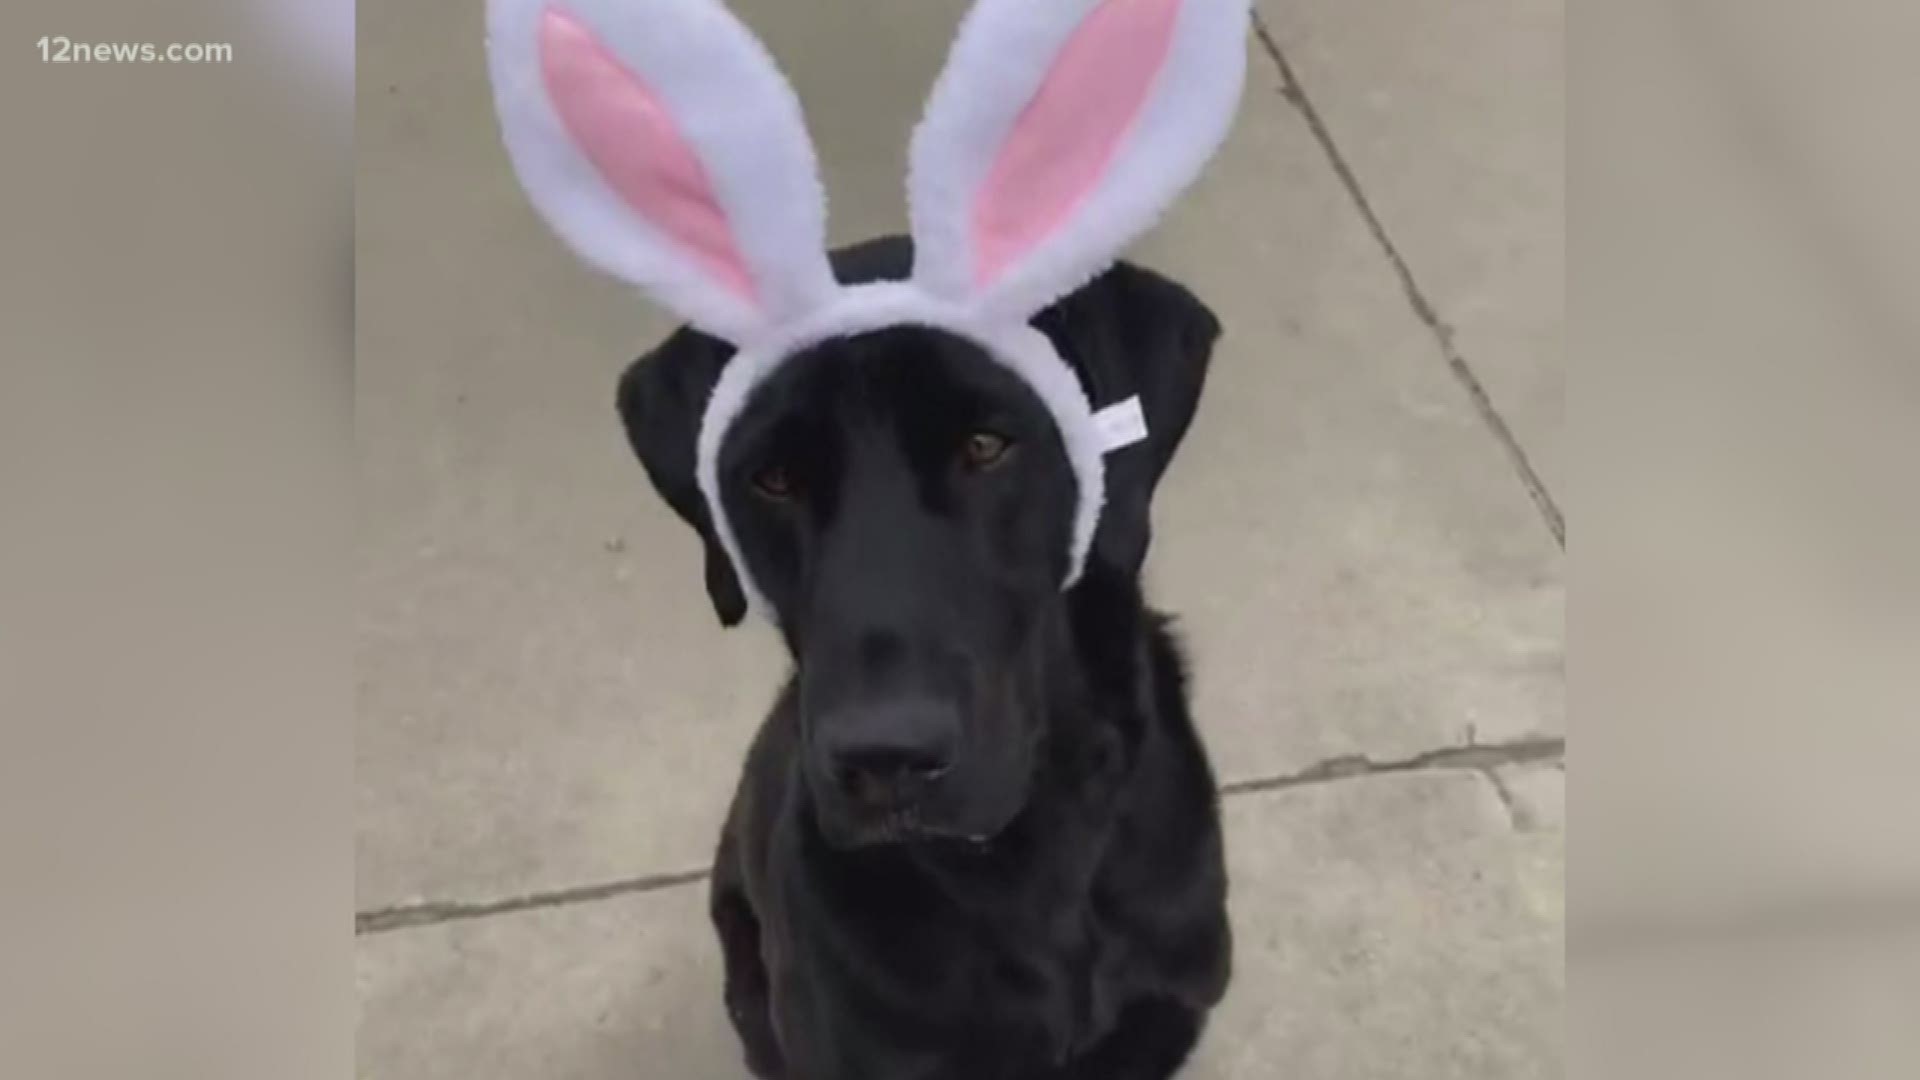 A Scottsdale dog is in the running to become one of the nation’s most beloved Easter icons: The Cadbury bunny.